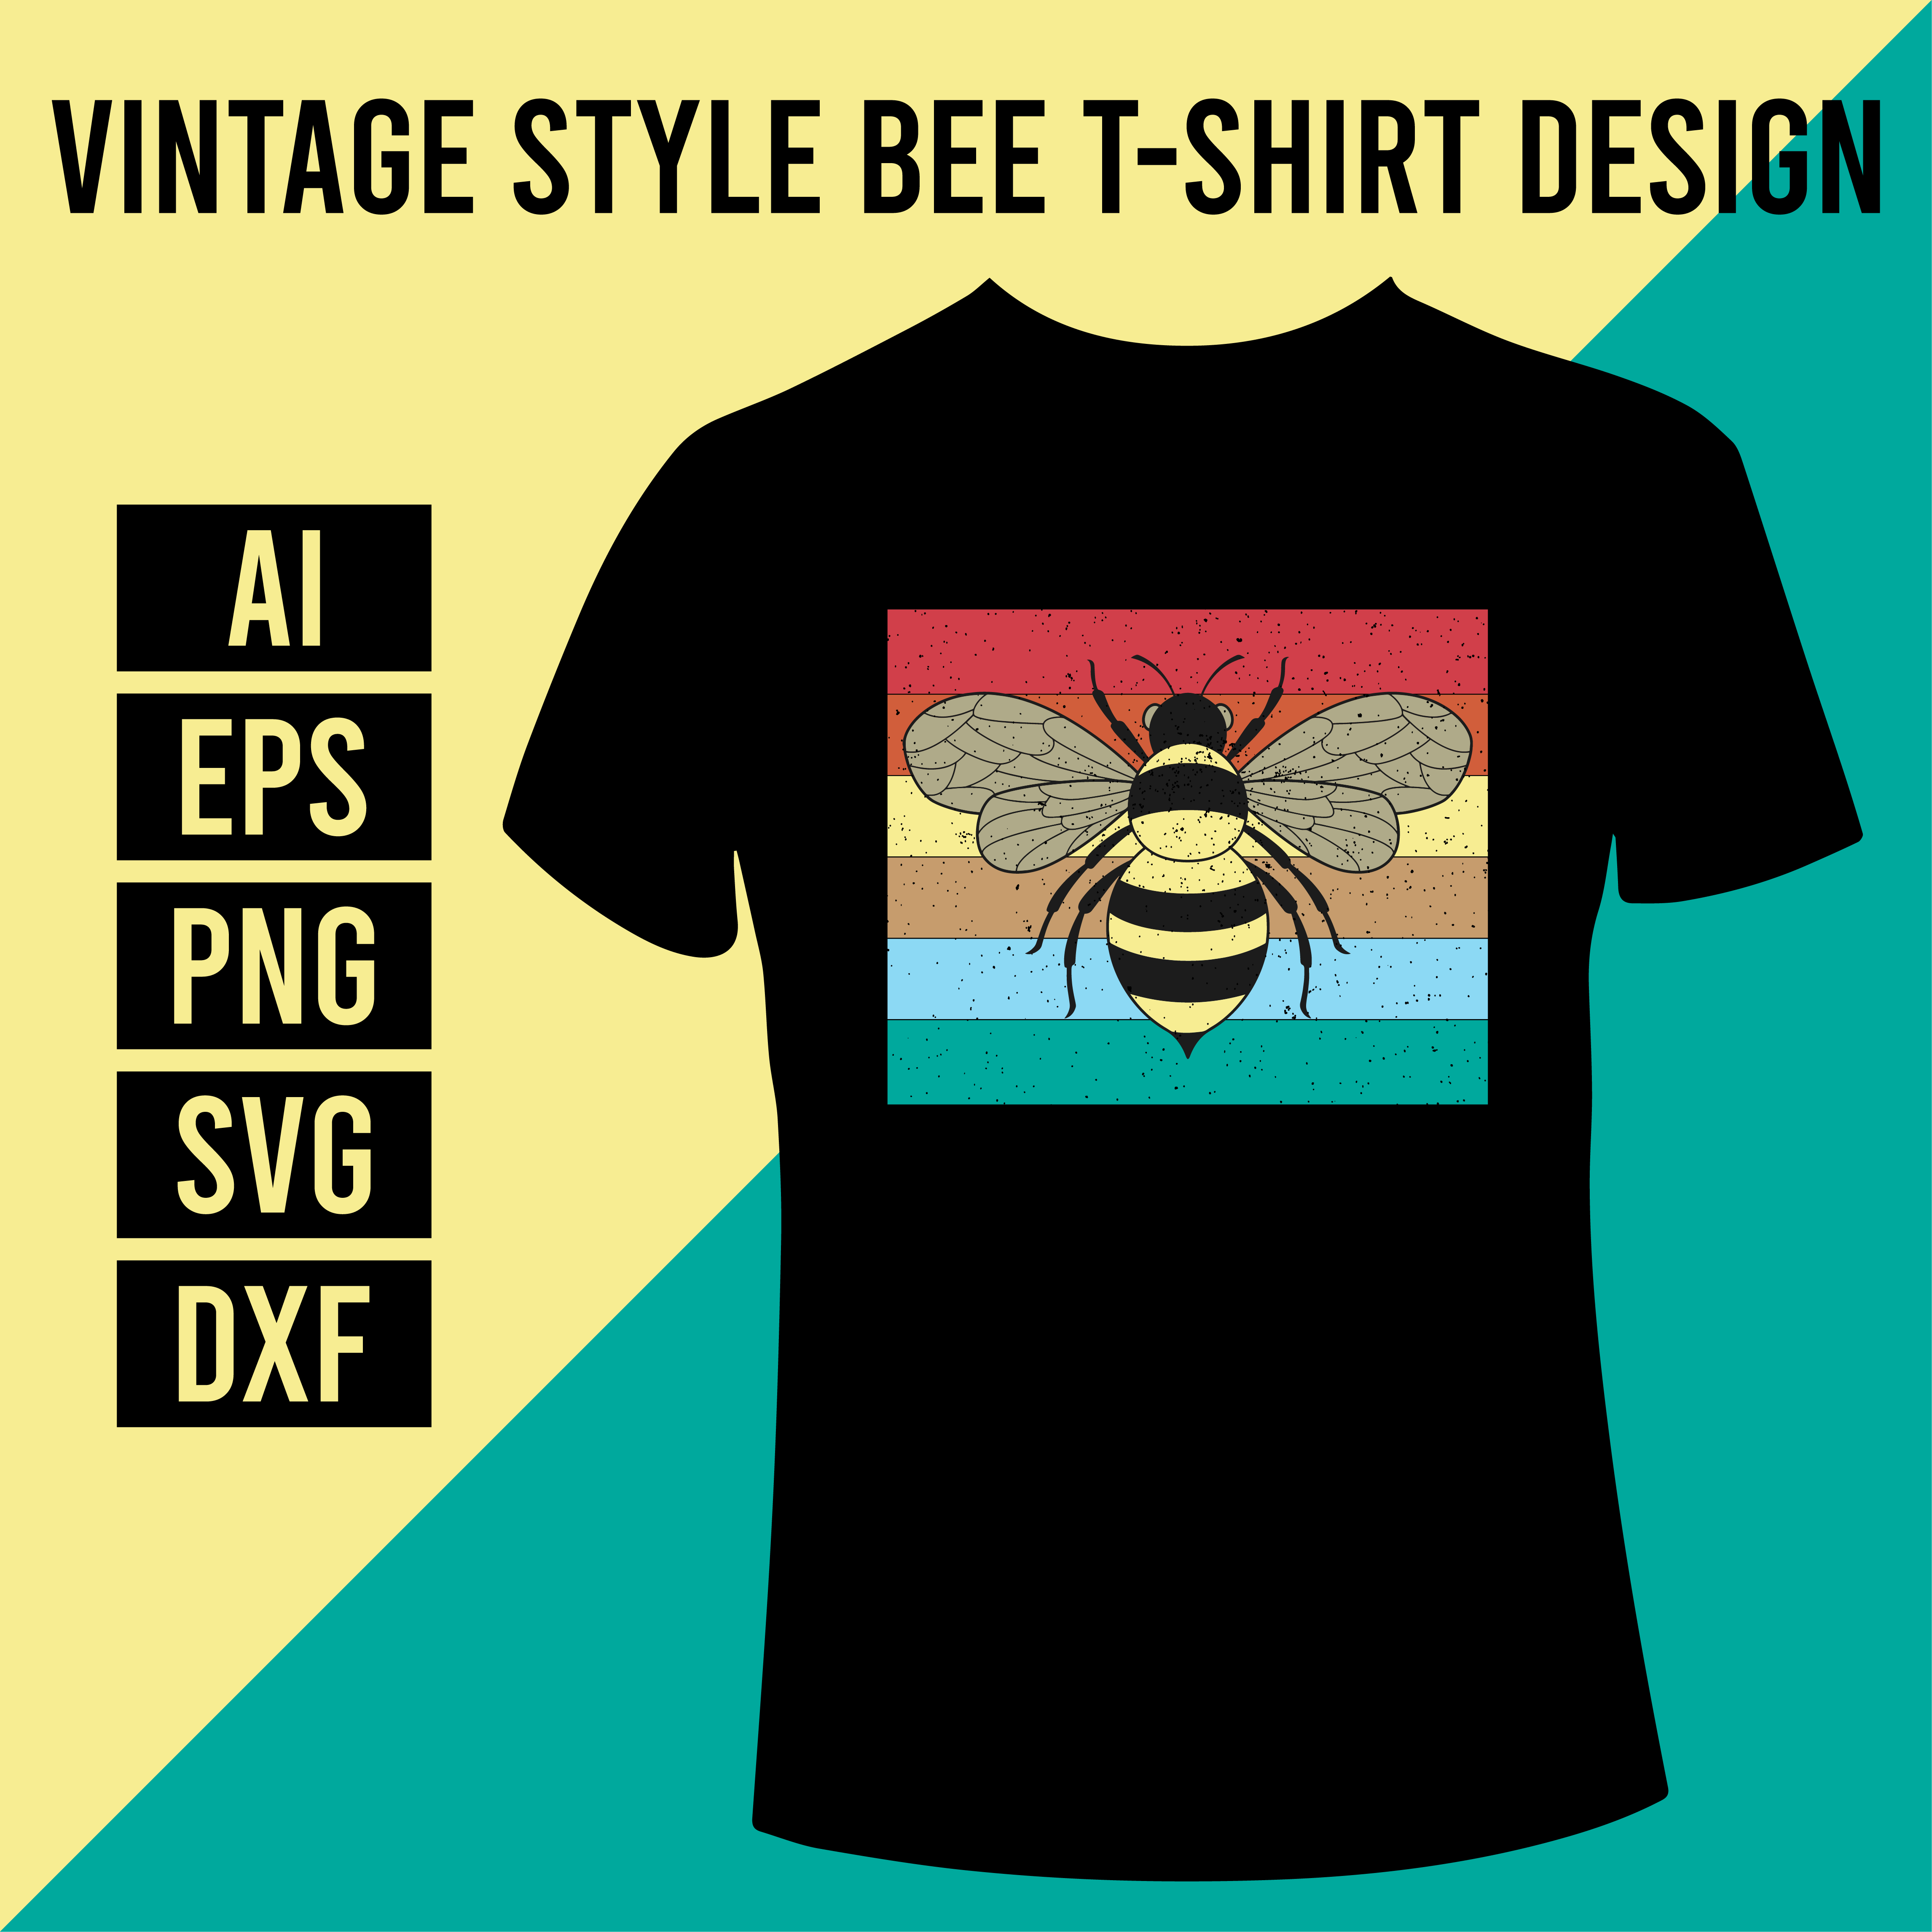 Vintage Style Bee T- Shirt Design main cover.